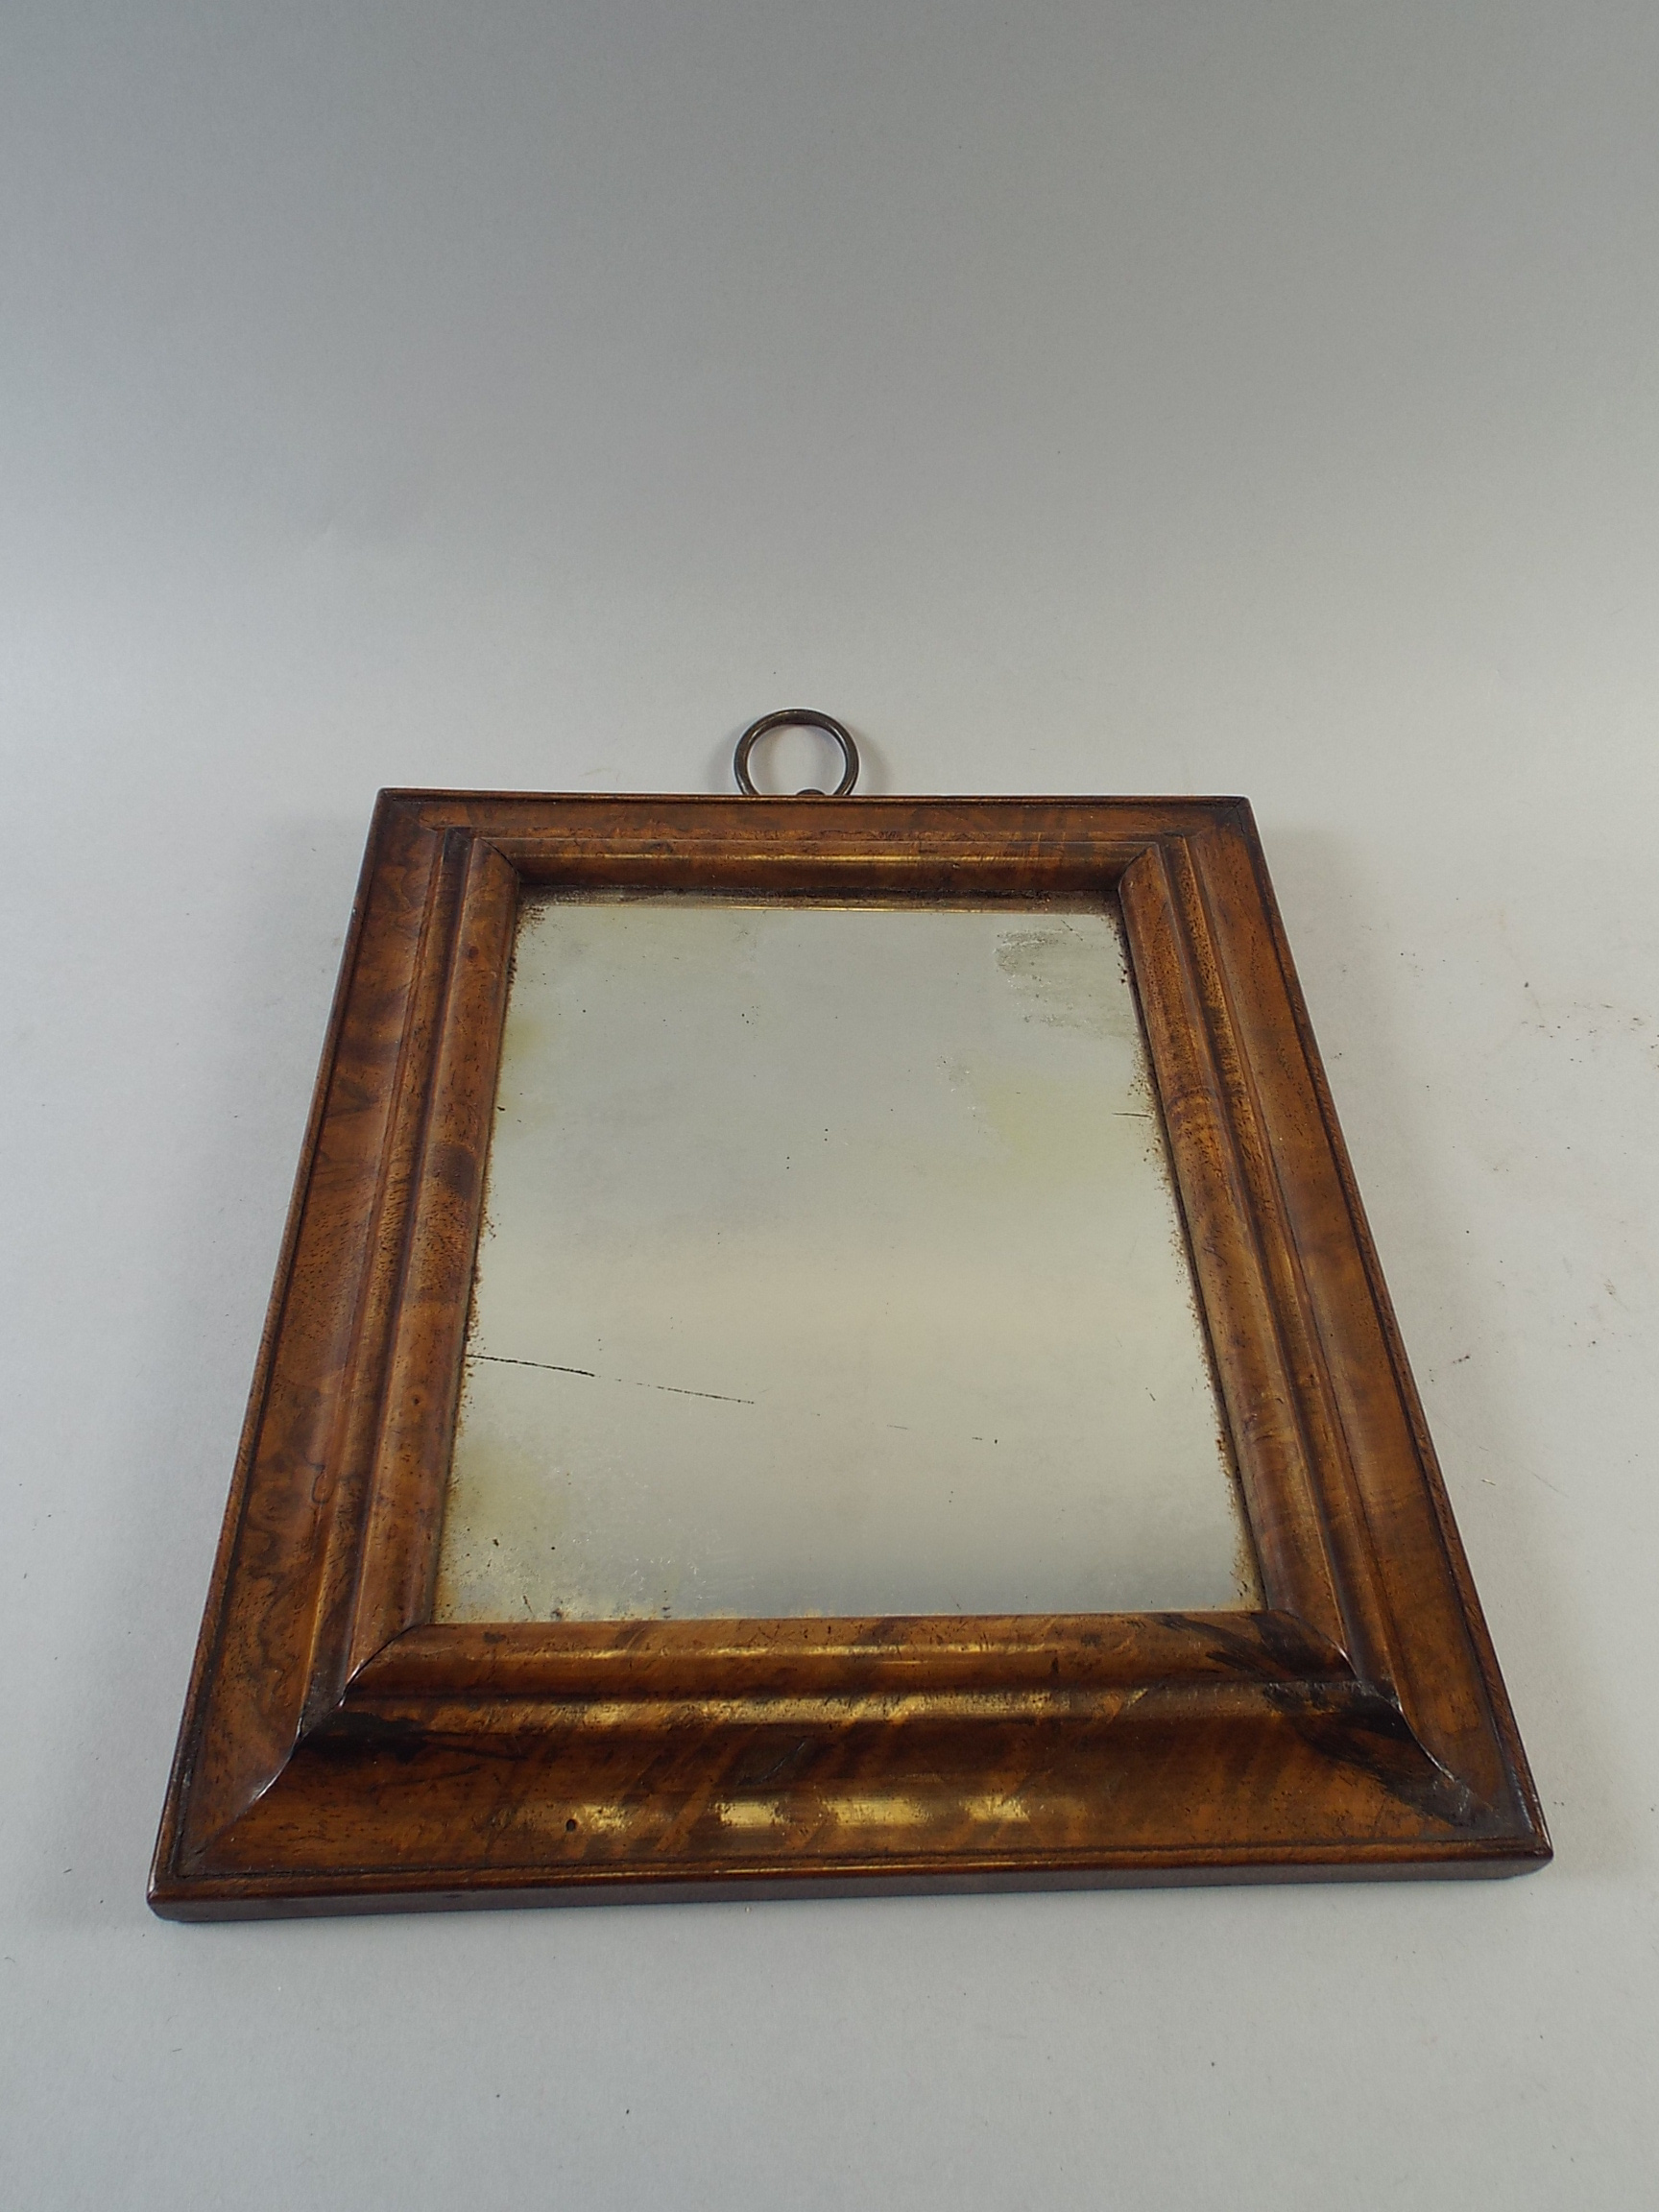 A 19th Century Wall Mirror with a Walnut Veneered Moulded Frame. 24x21cm